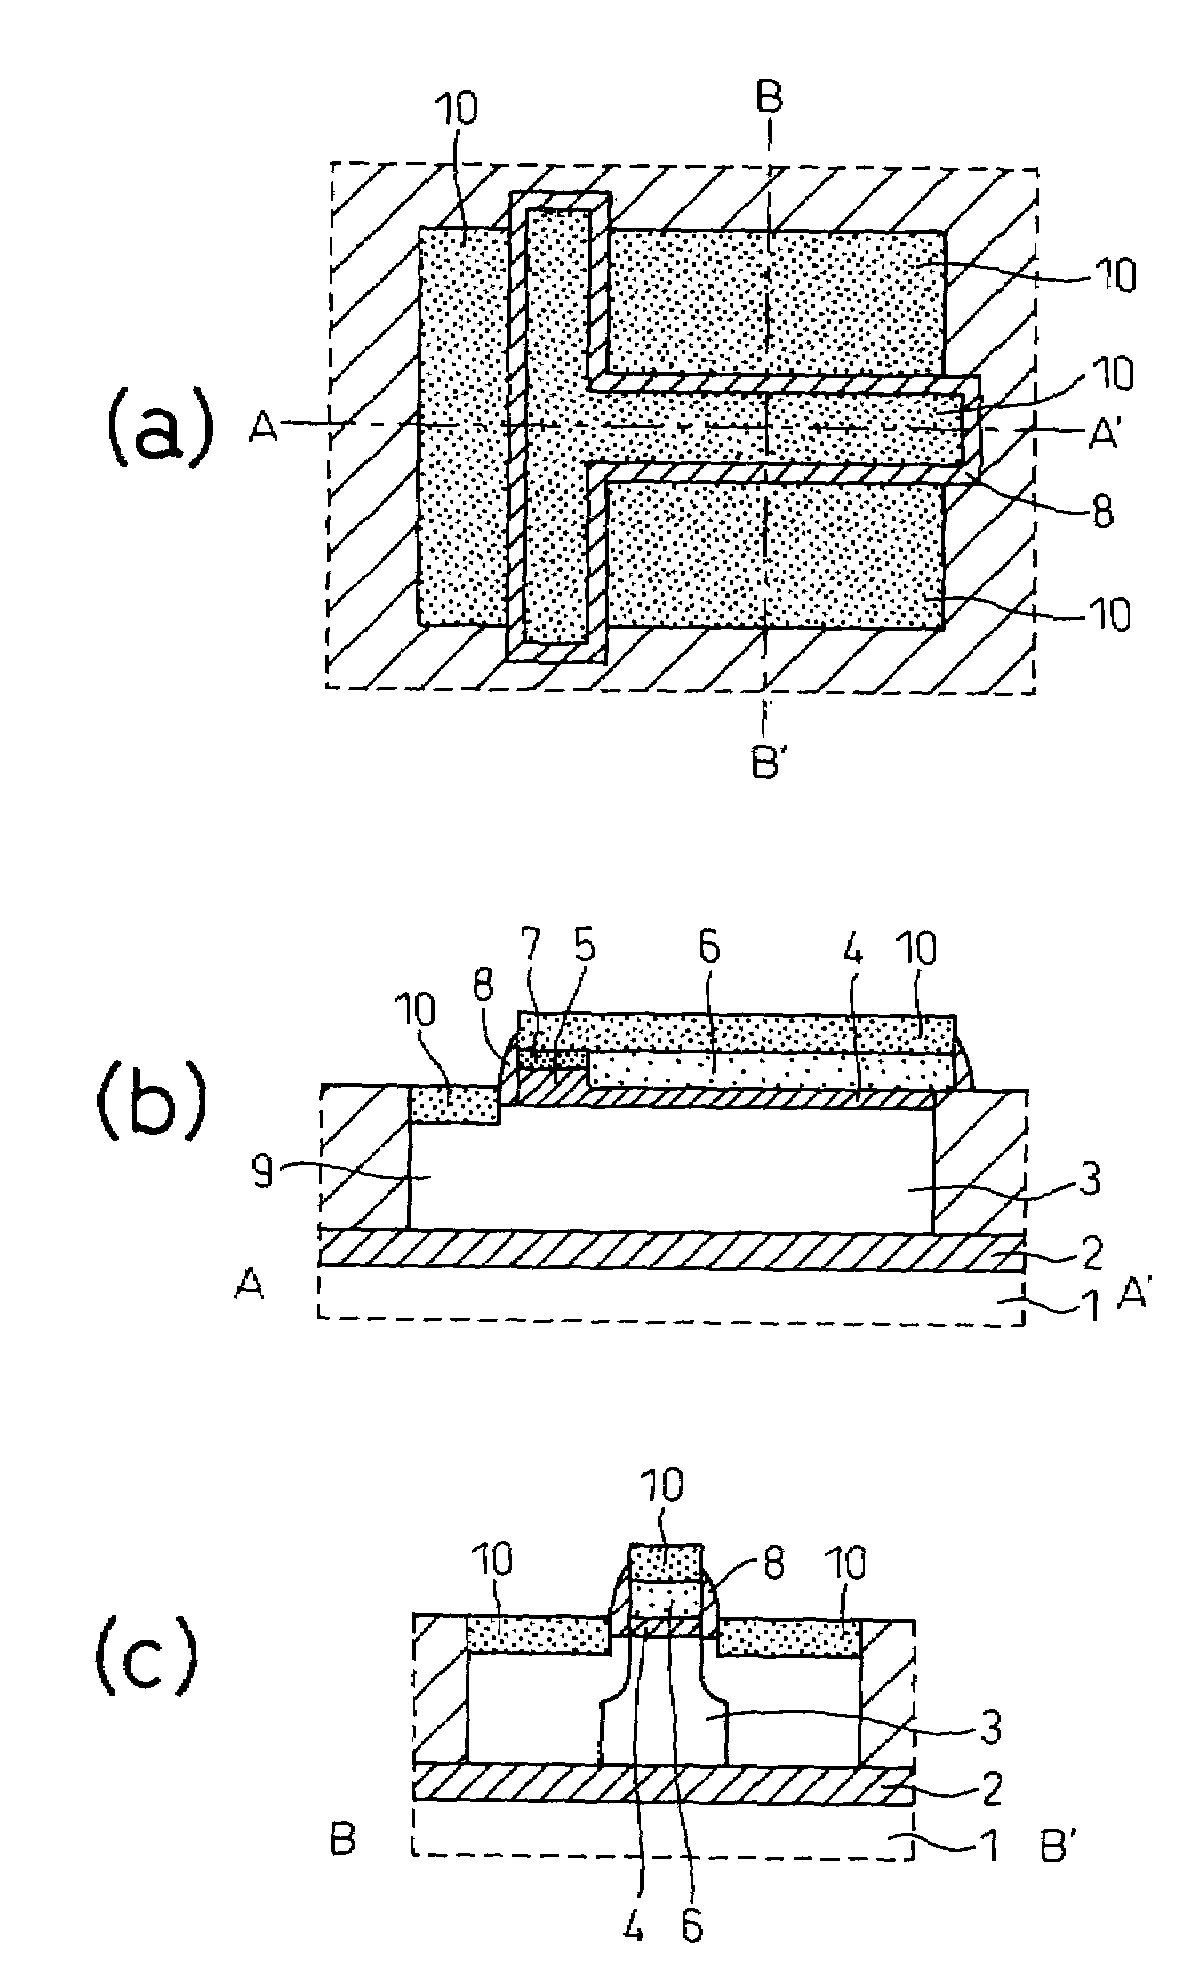 Insulated gate type semiconductor device and method for fabricating same